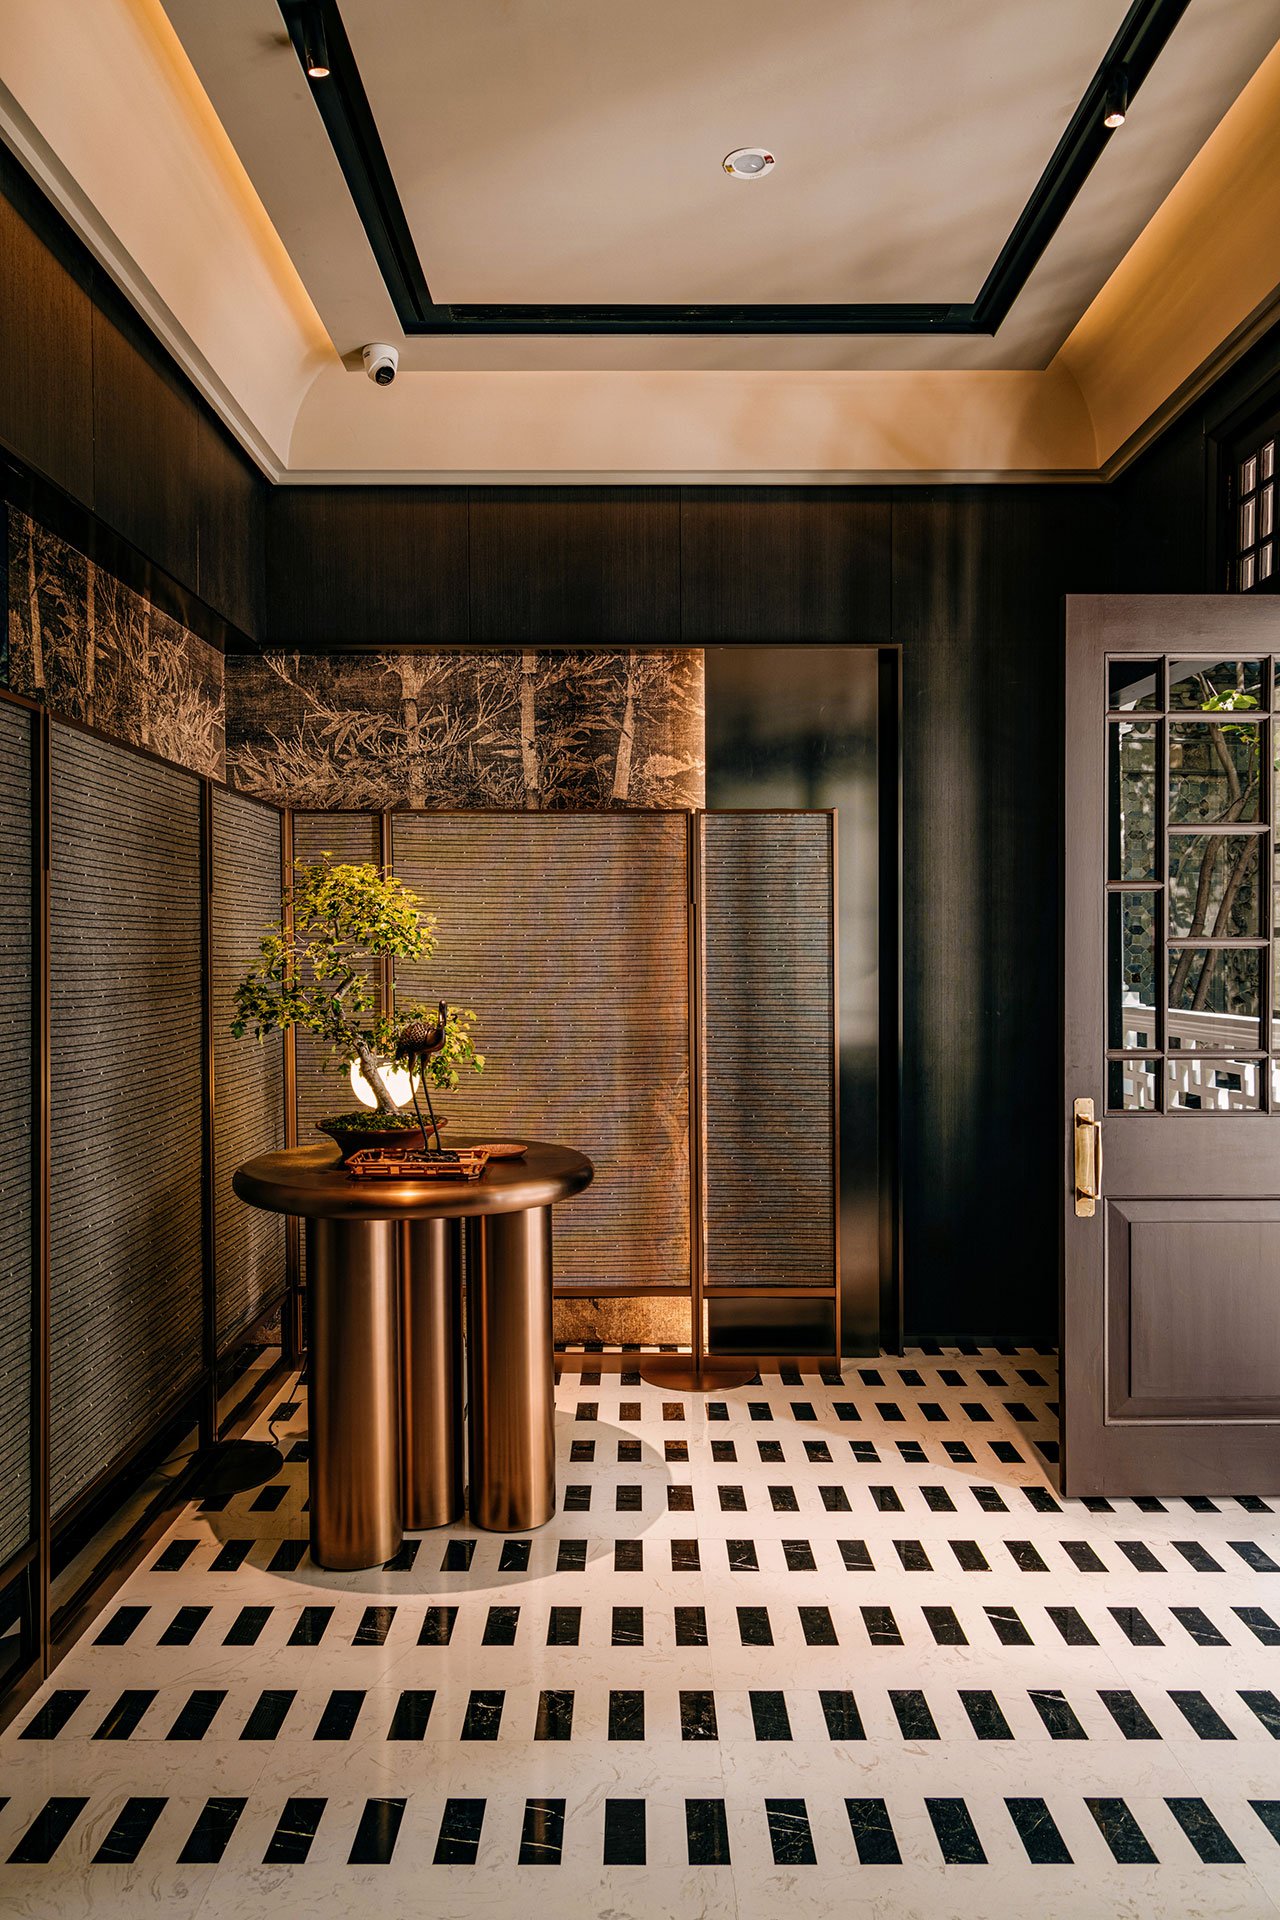 the entry of the restaurant featuring black and white tiles, wood panels and a golden center table